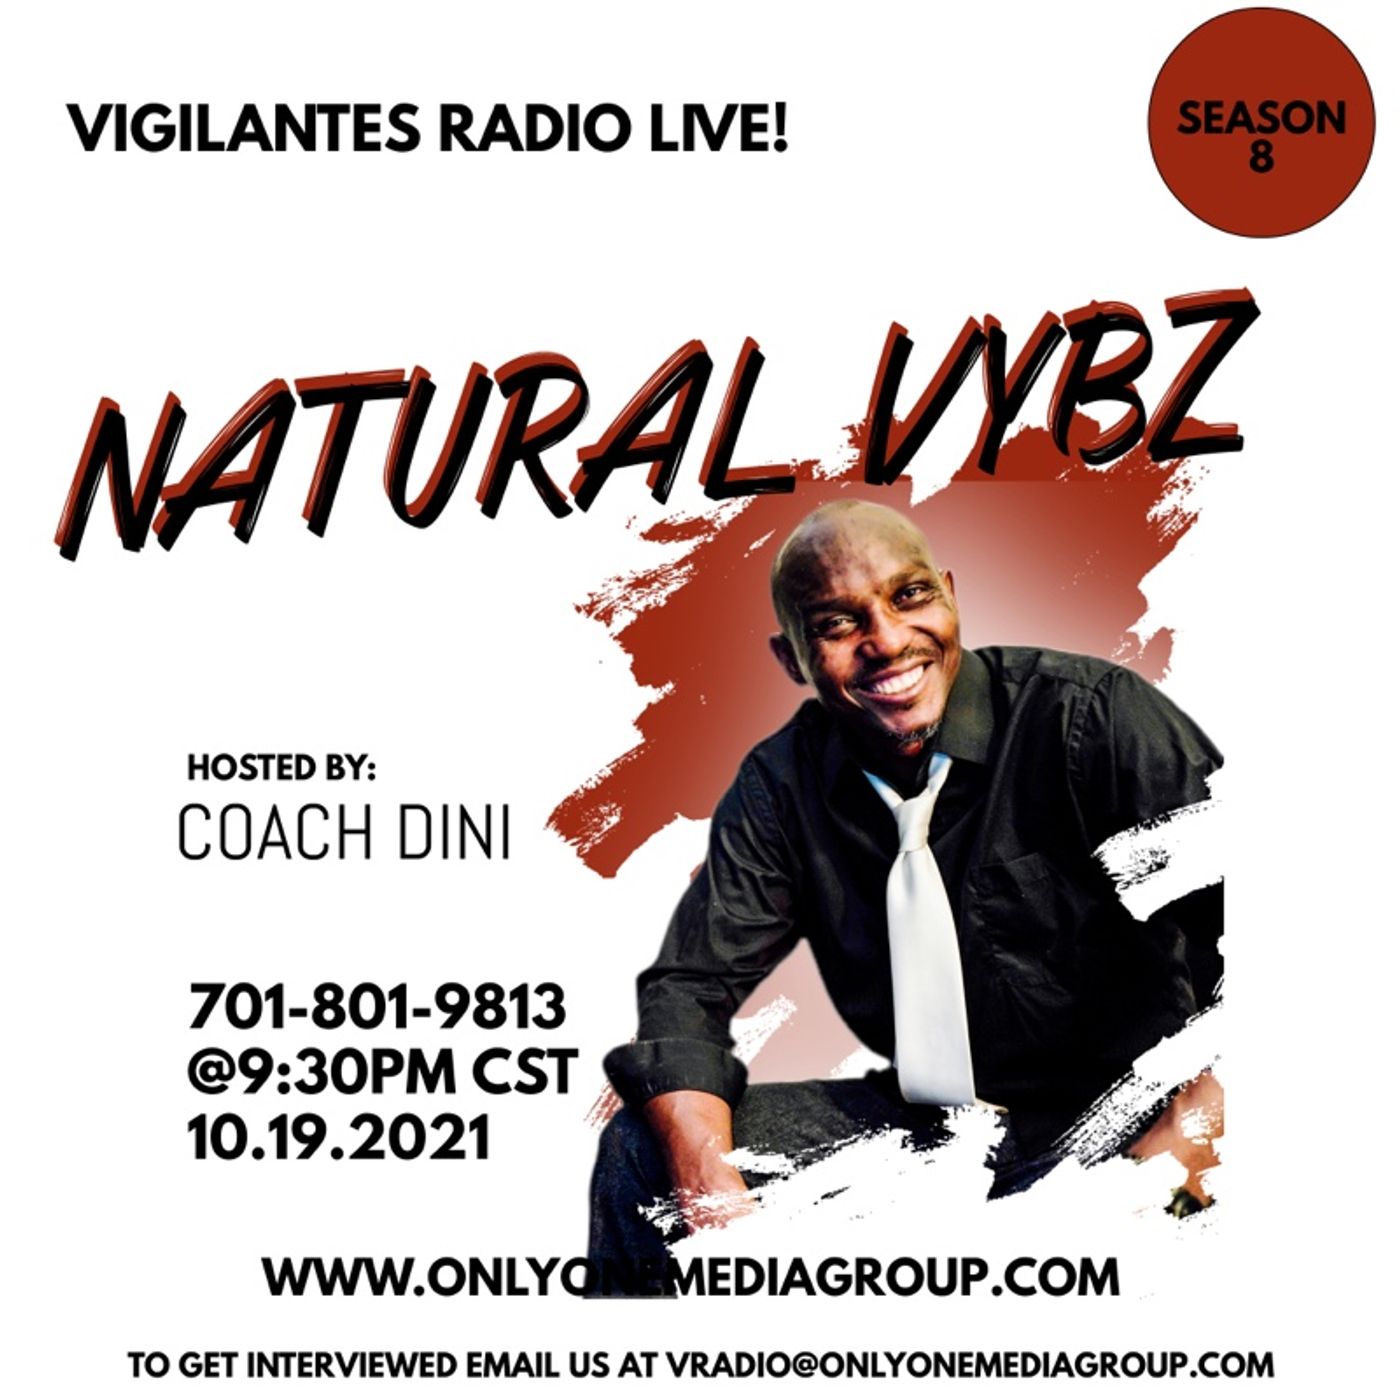 The Natural Vybz Interview. Image